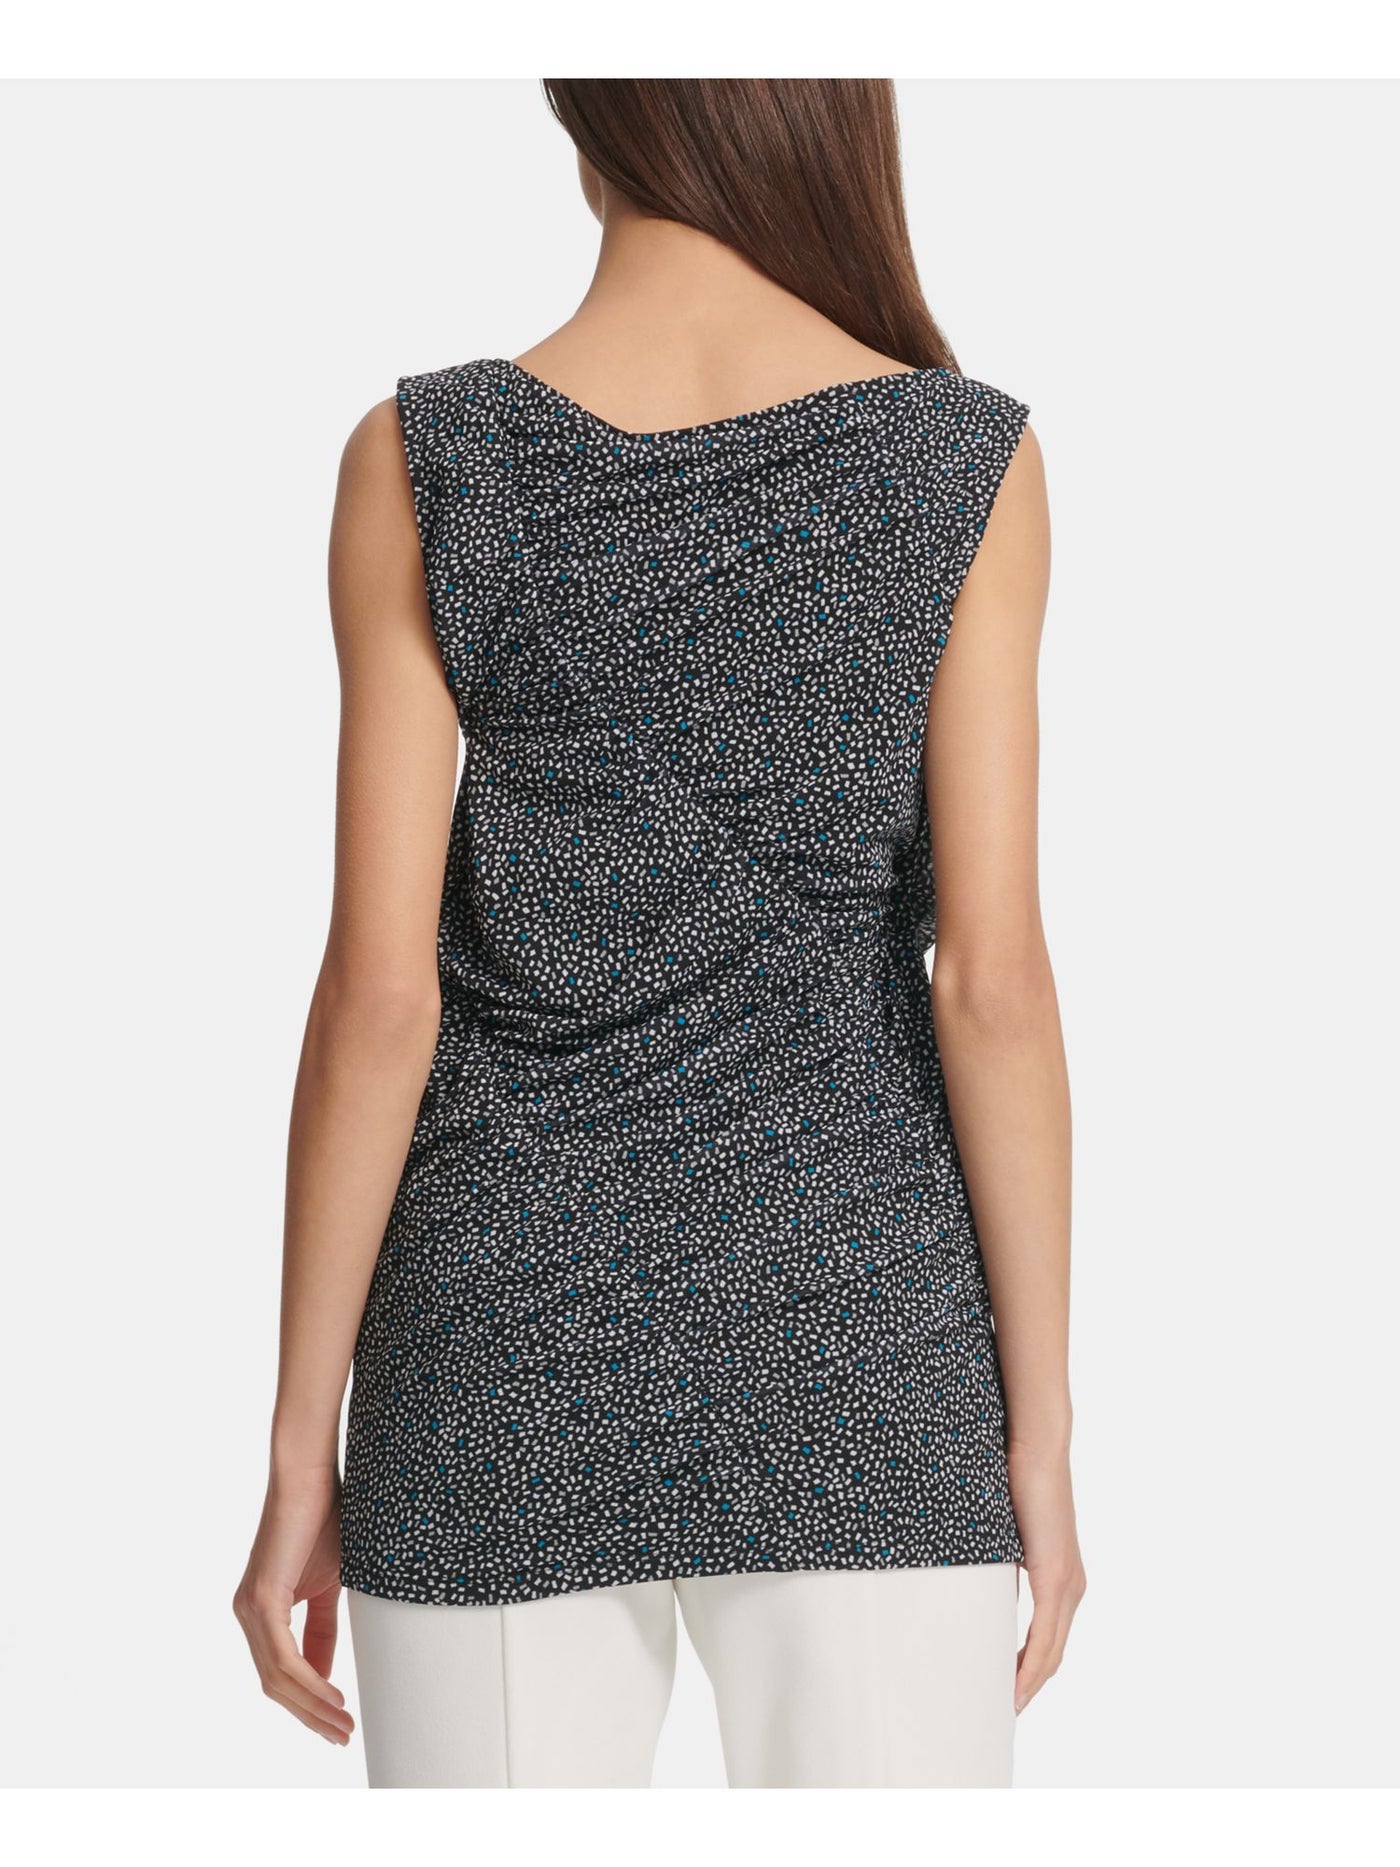 DKNY Womens Ruched Sleeveless Jewel Neck Blouse